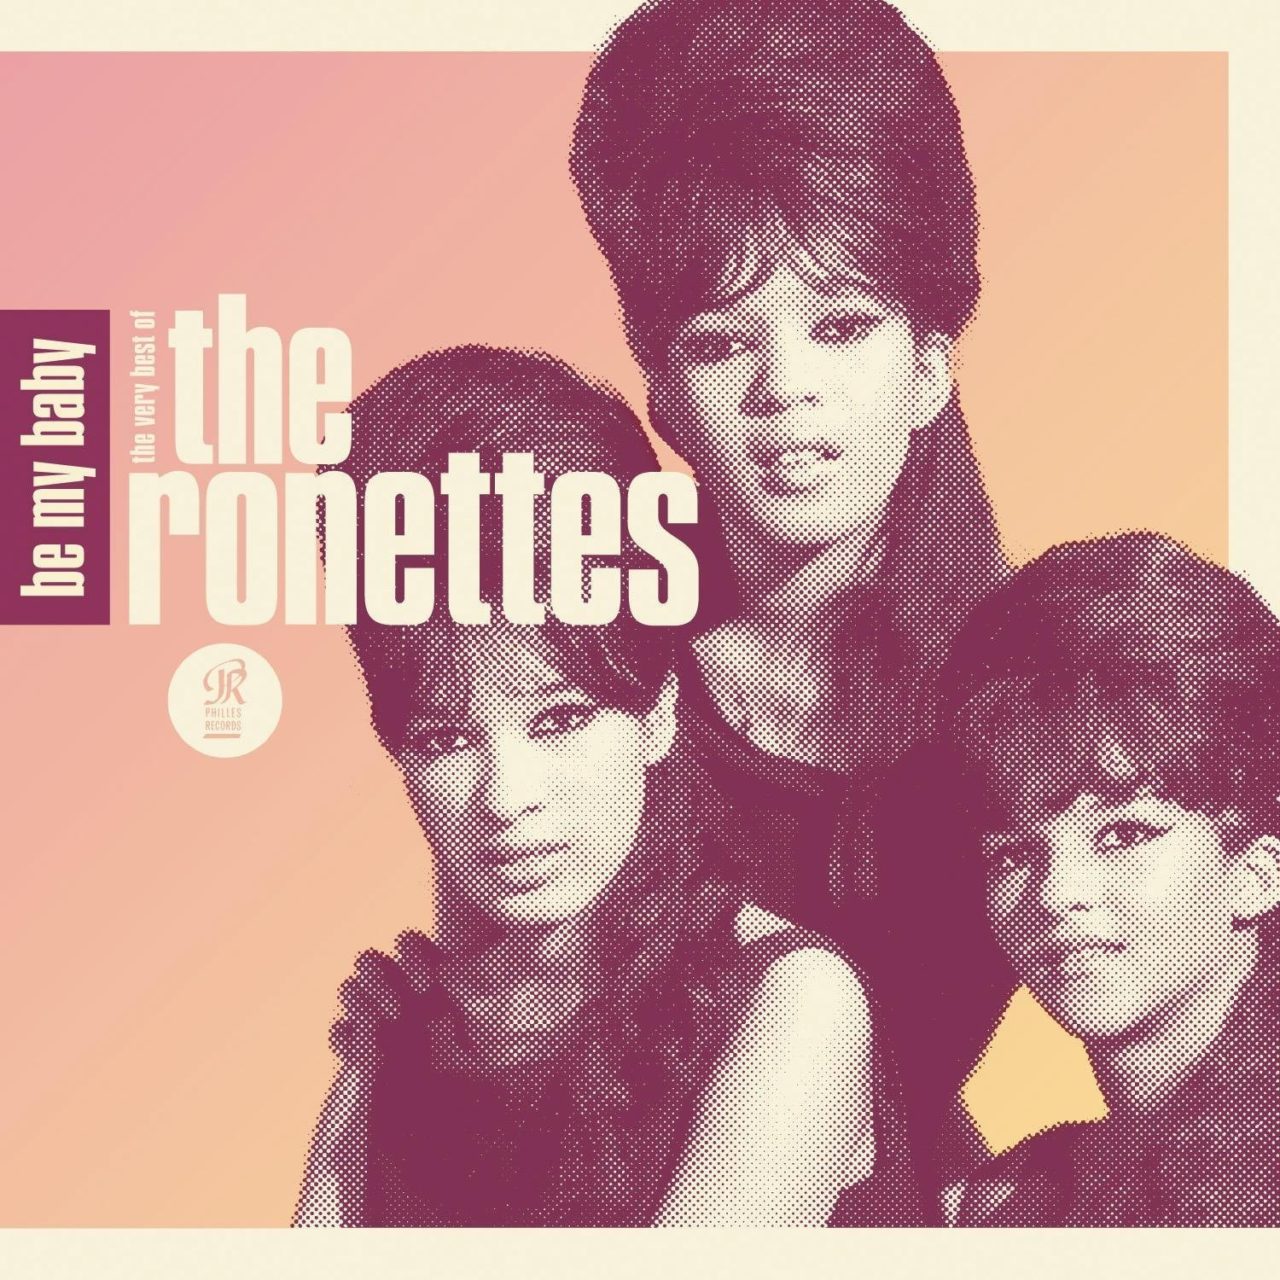 Ronettes -Be my Baby